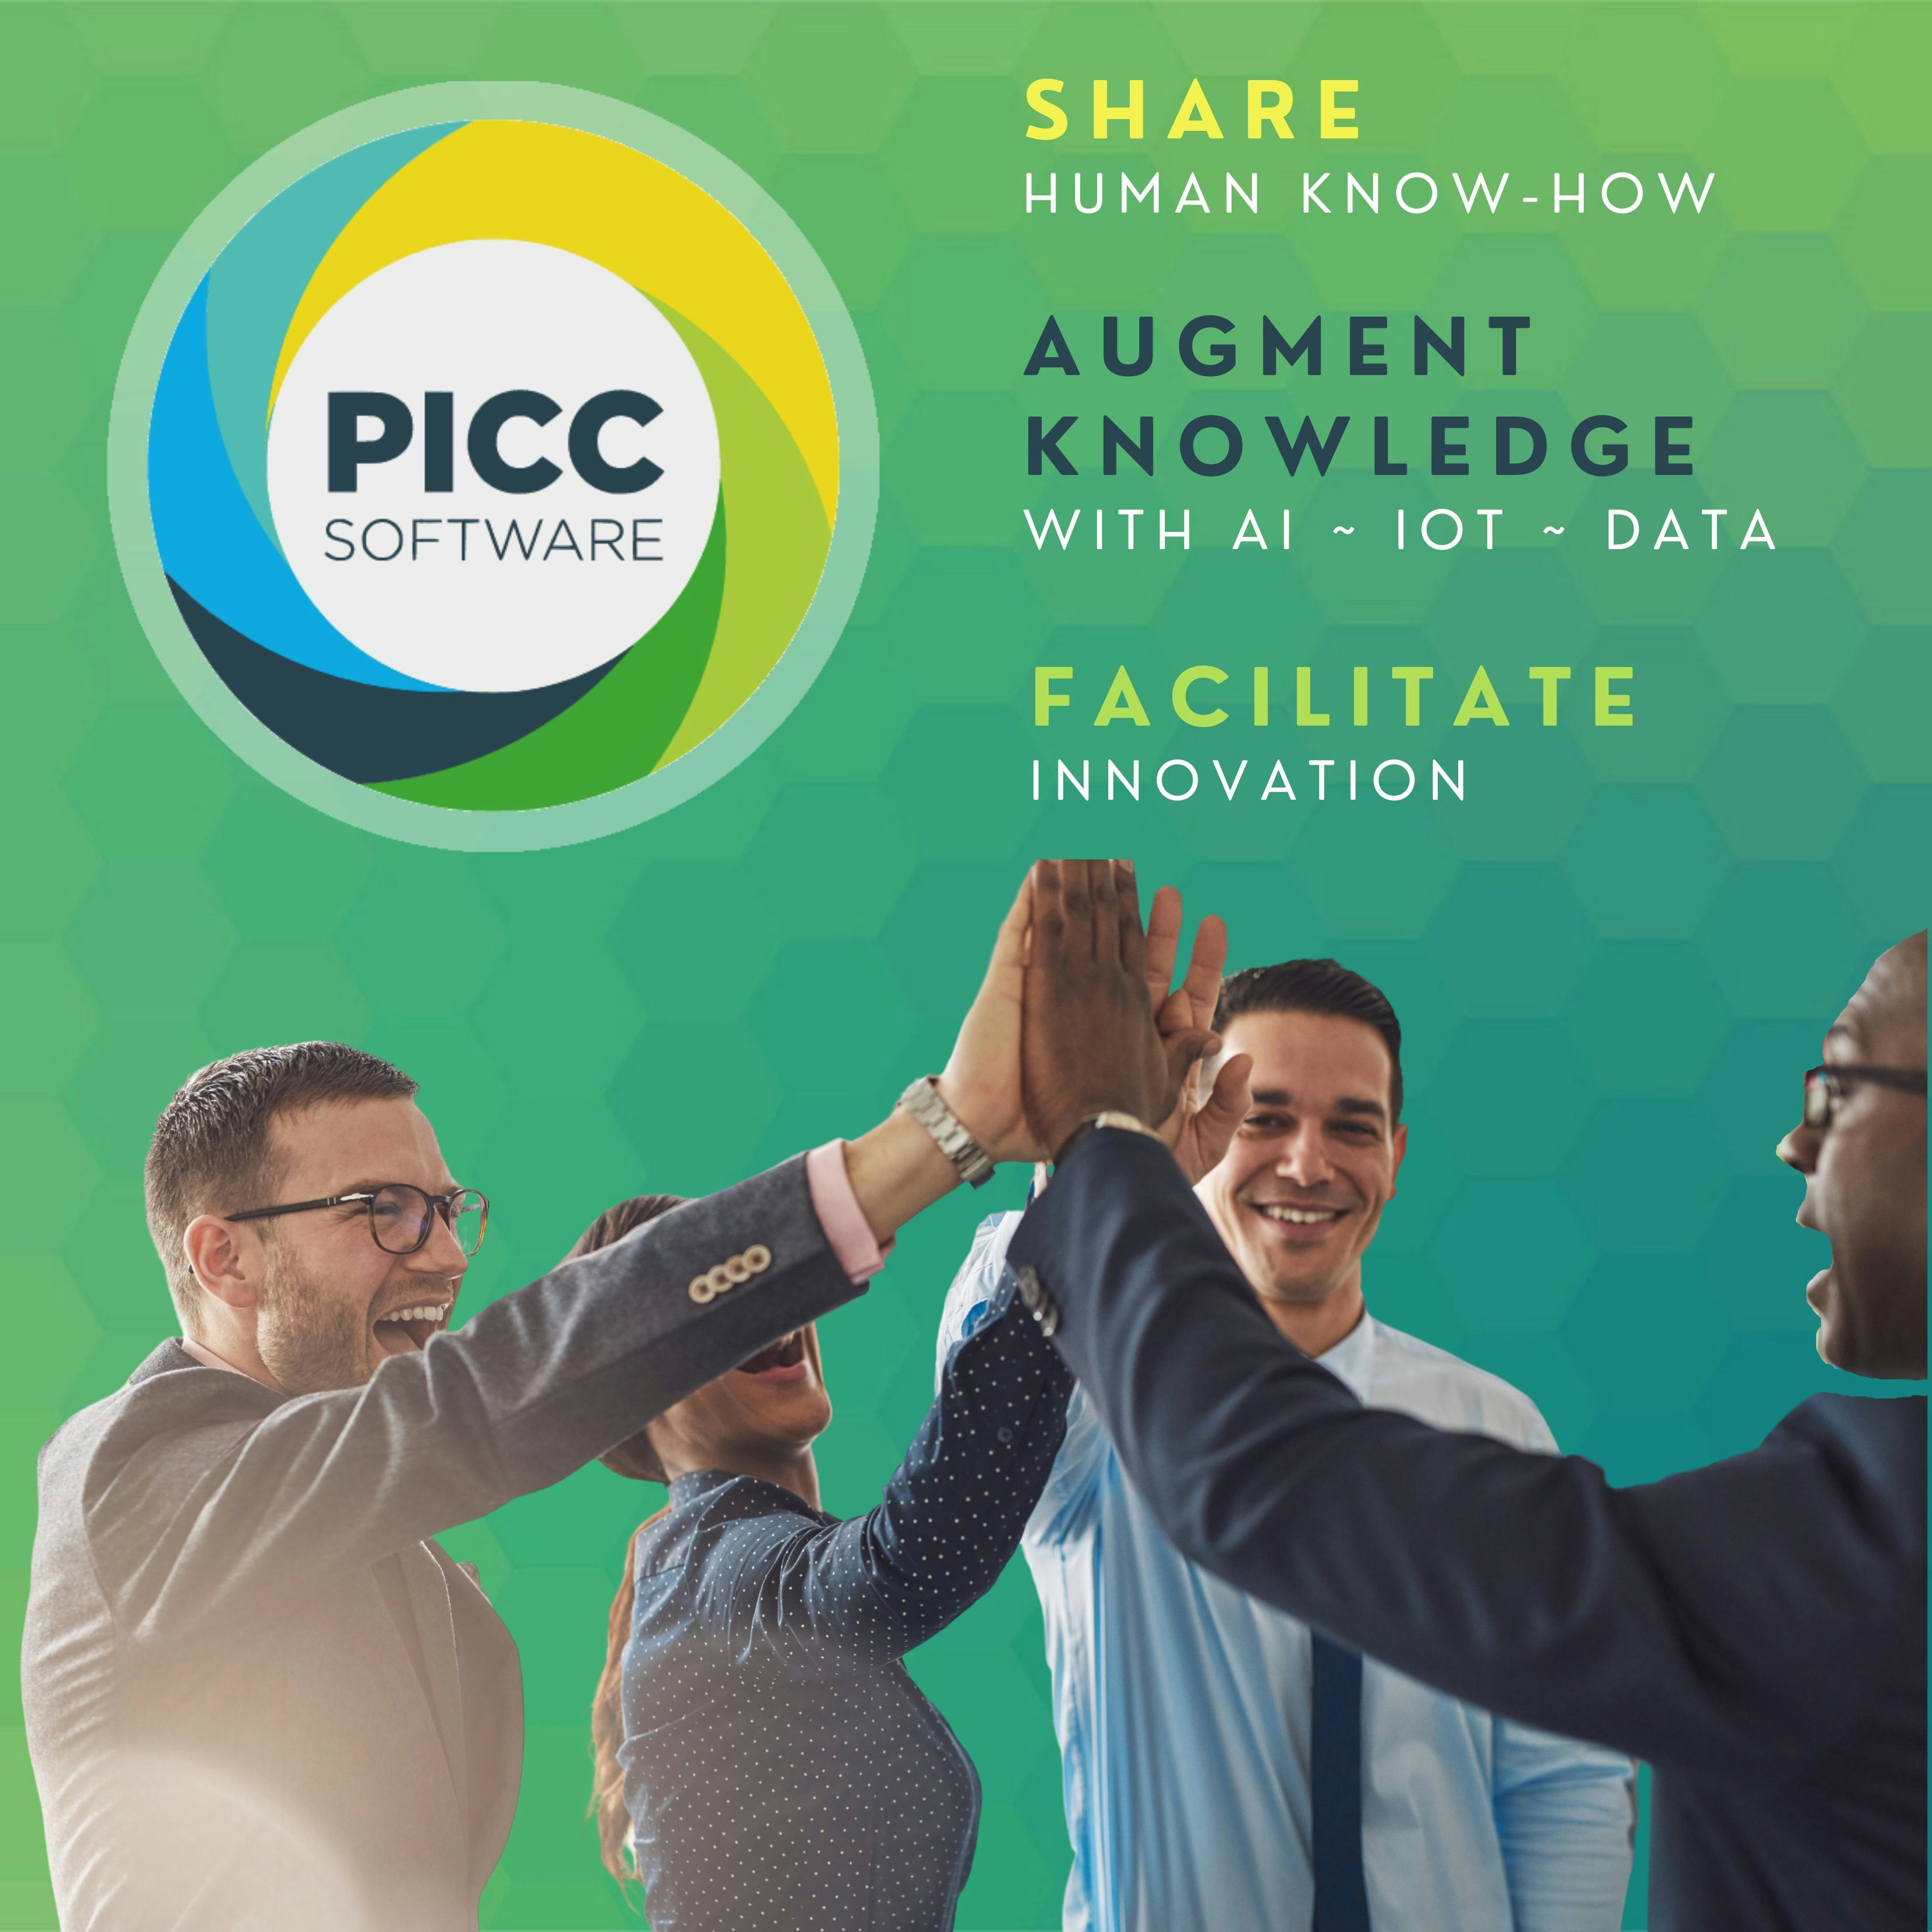 PICC Software Software - 1